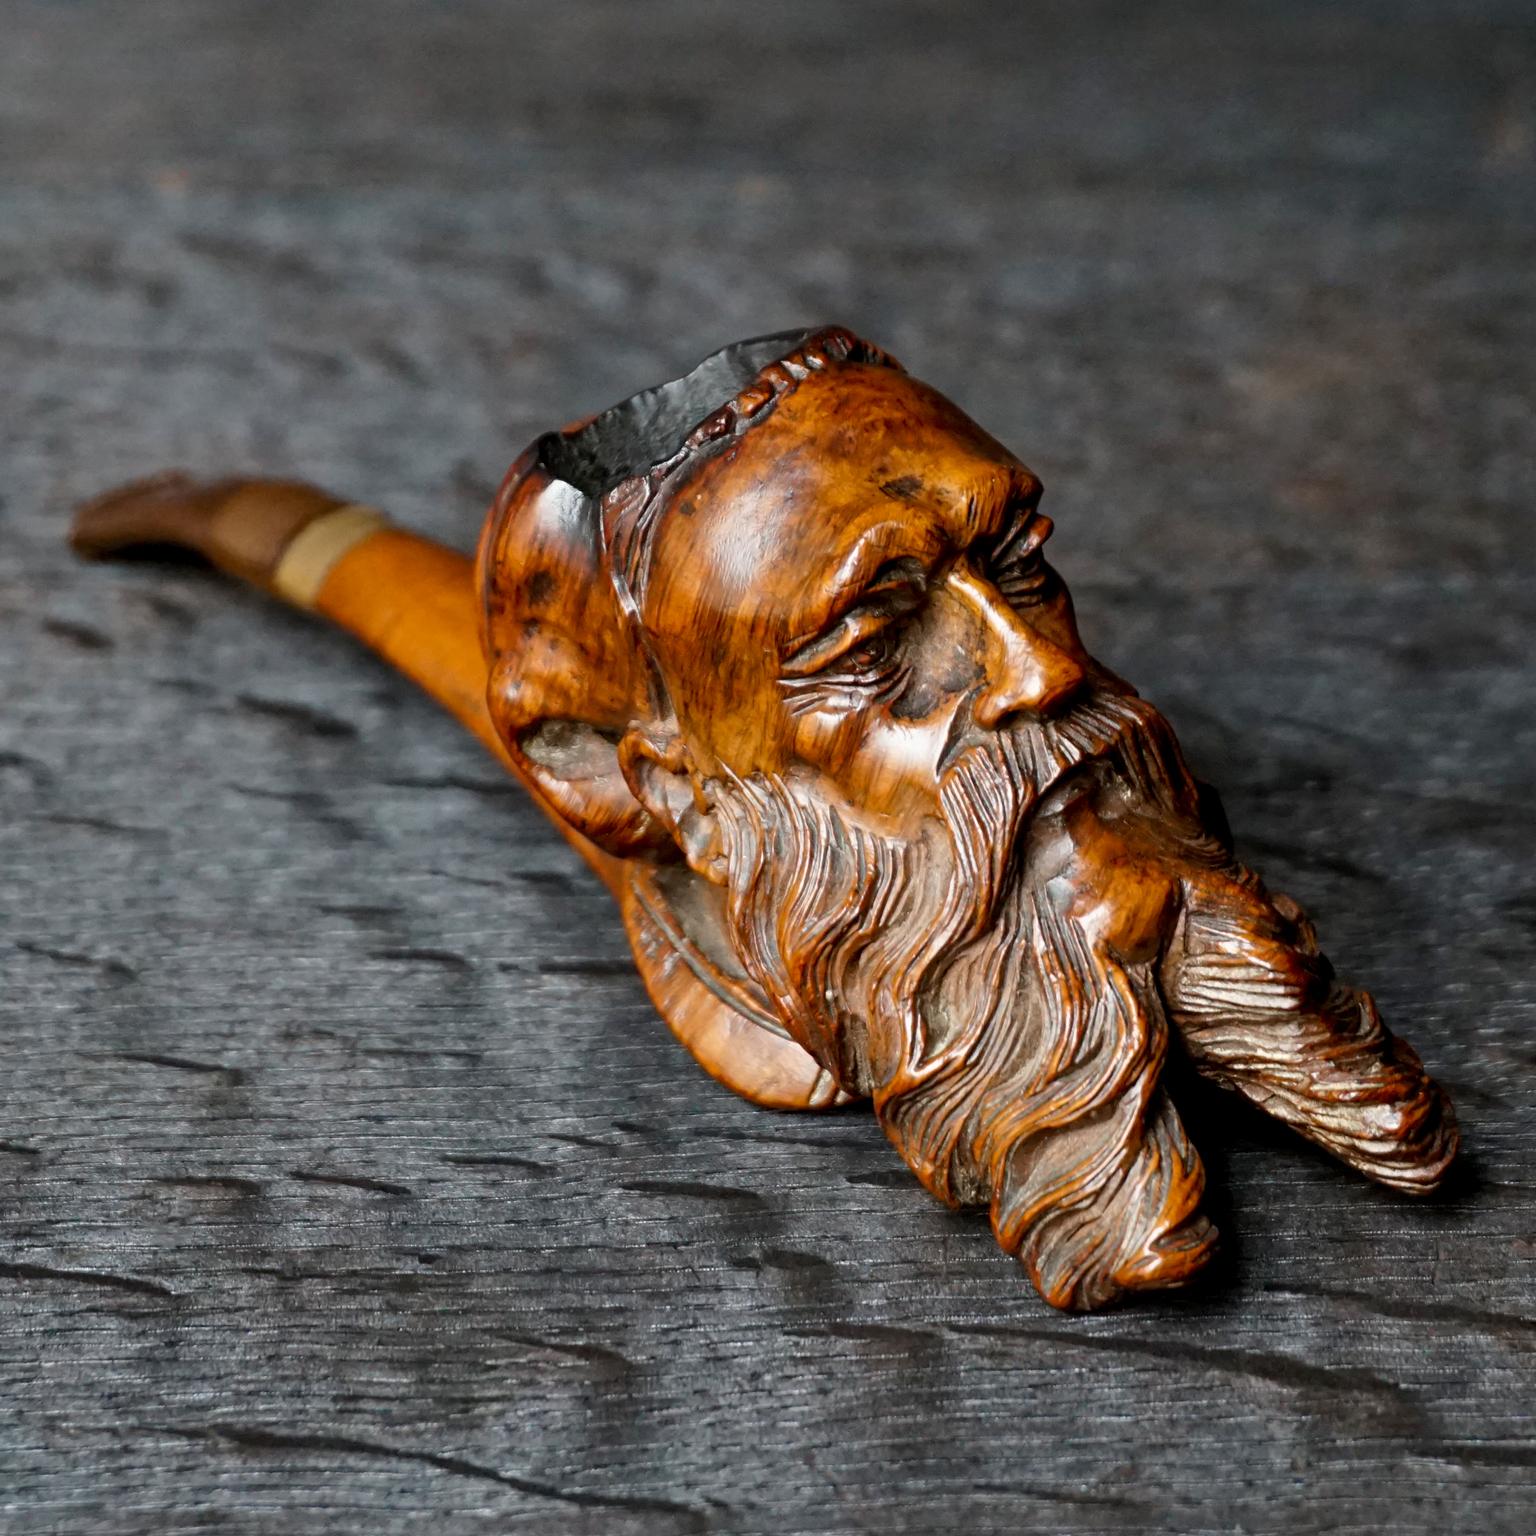 Impressive craftsmanship on the carving of this antique bearded man with nightcap, better known as Mr. Sandman.

The bakelite mouthpiece is probably not original and could easily be replaced for a new one to make a fresh smoking start. 
The metal